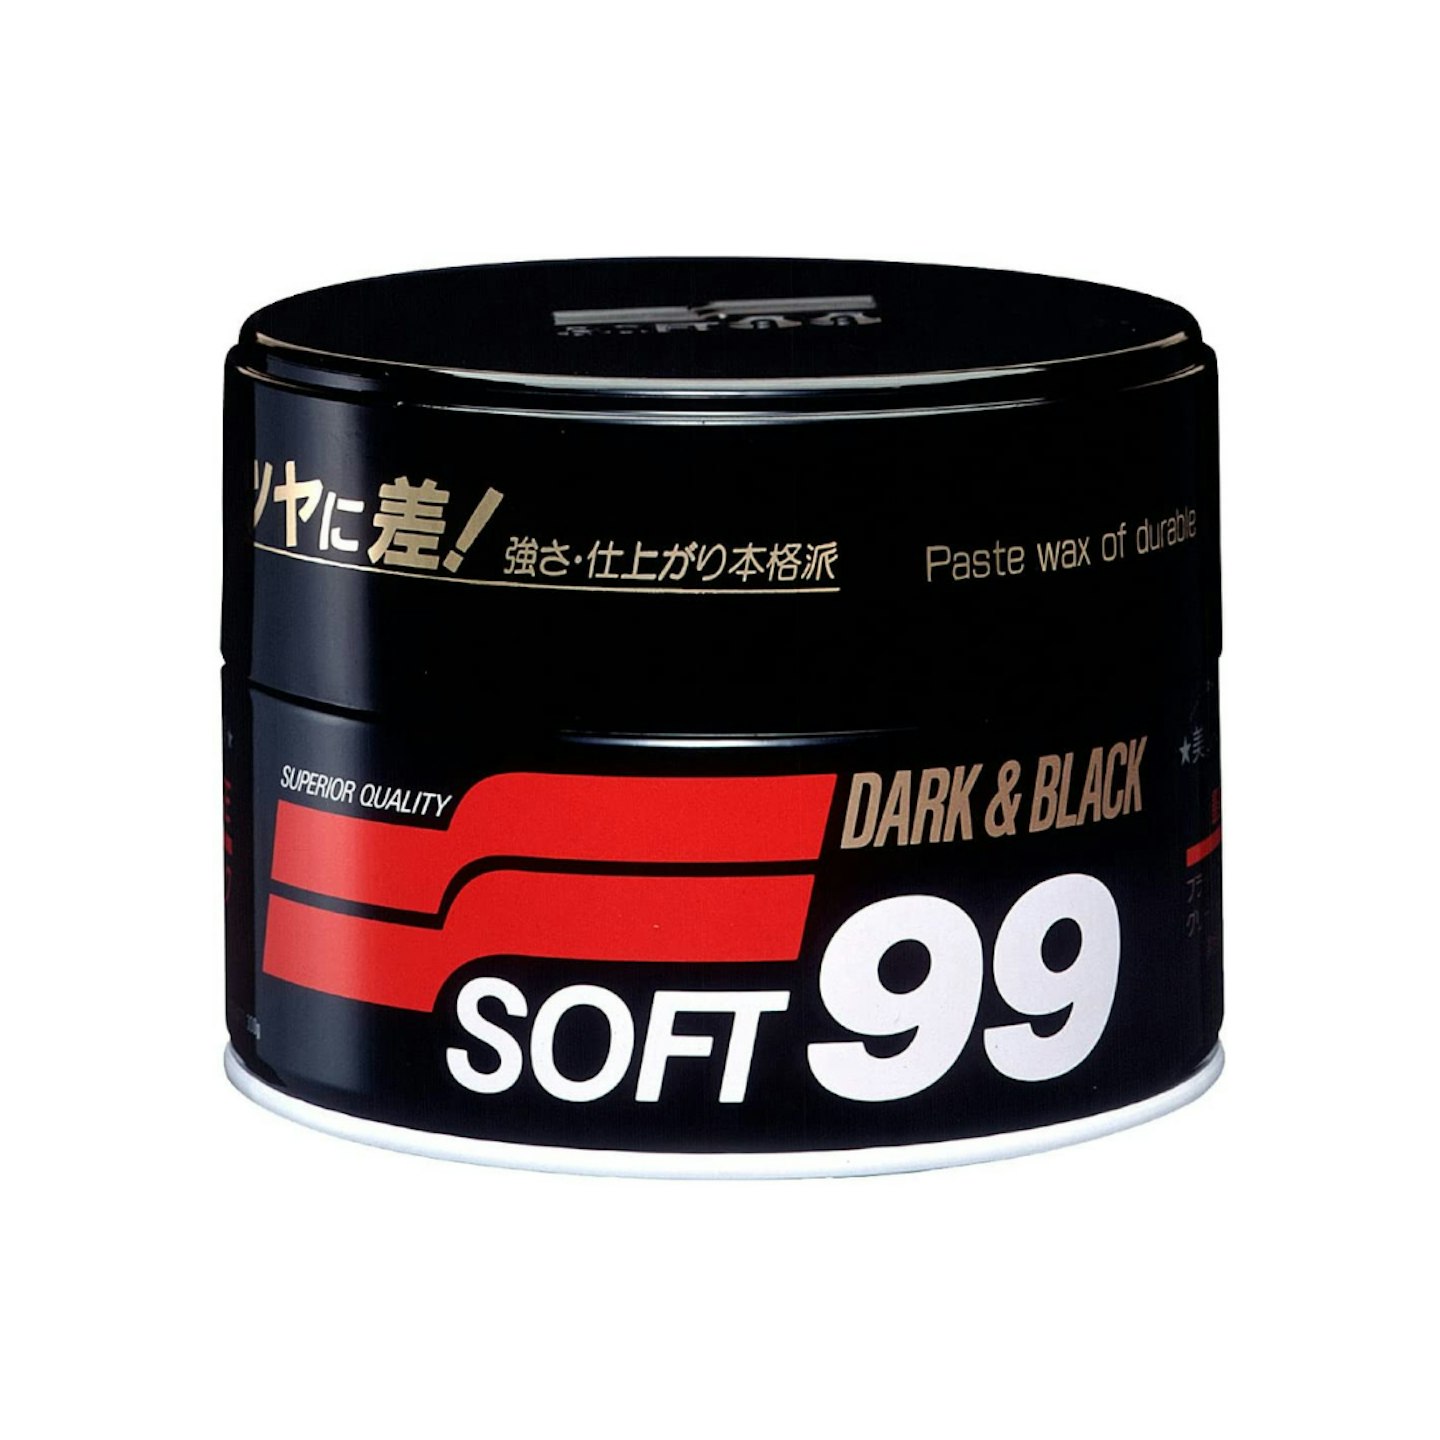 Soft99 Dark and Black Wax review: the paste from the past